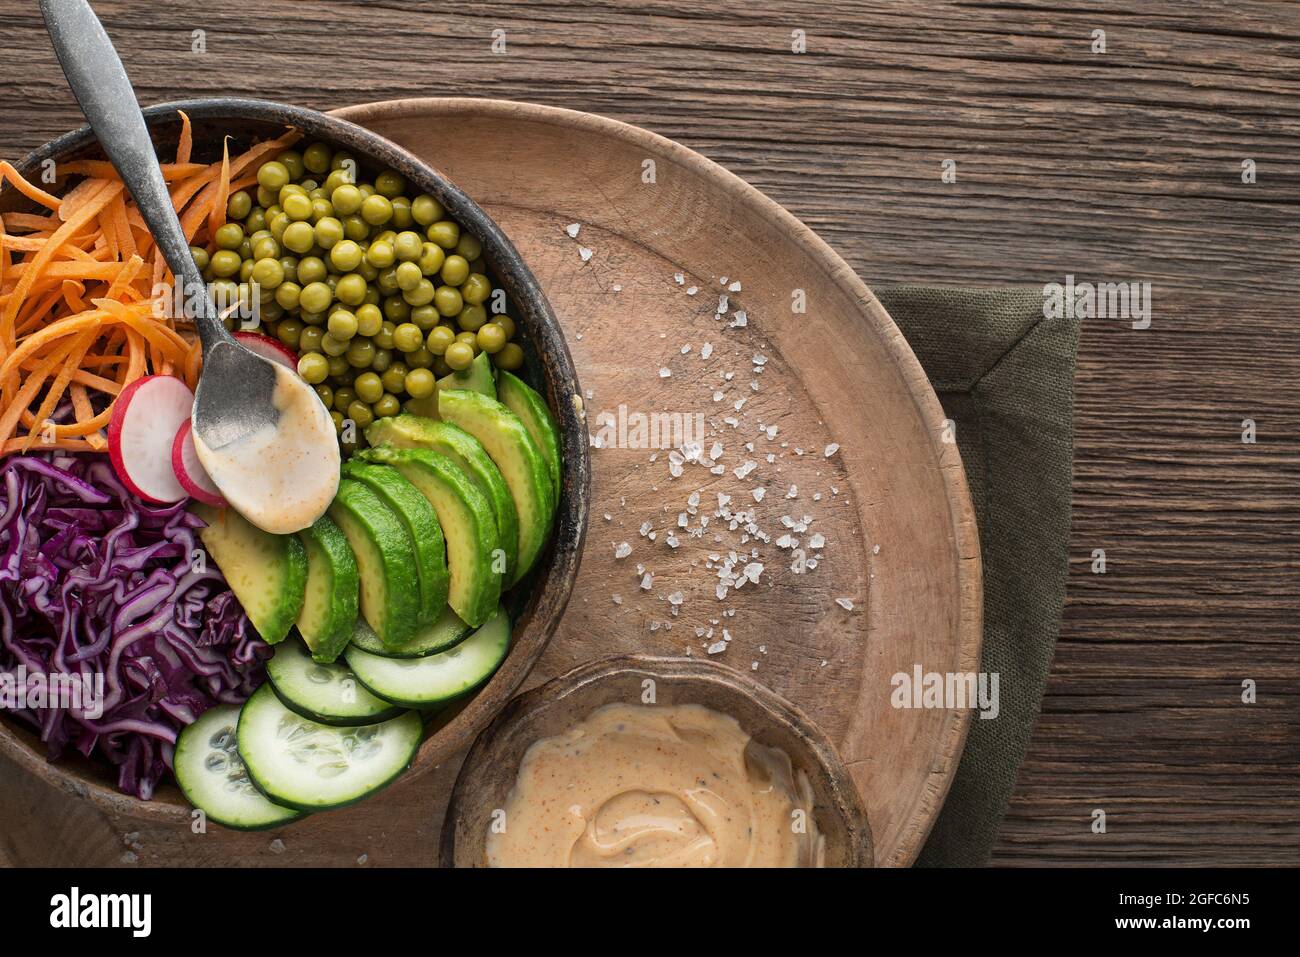 Healthy vegetable meal with avocado and cooked vegetables on wooden table close up Stock Photo